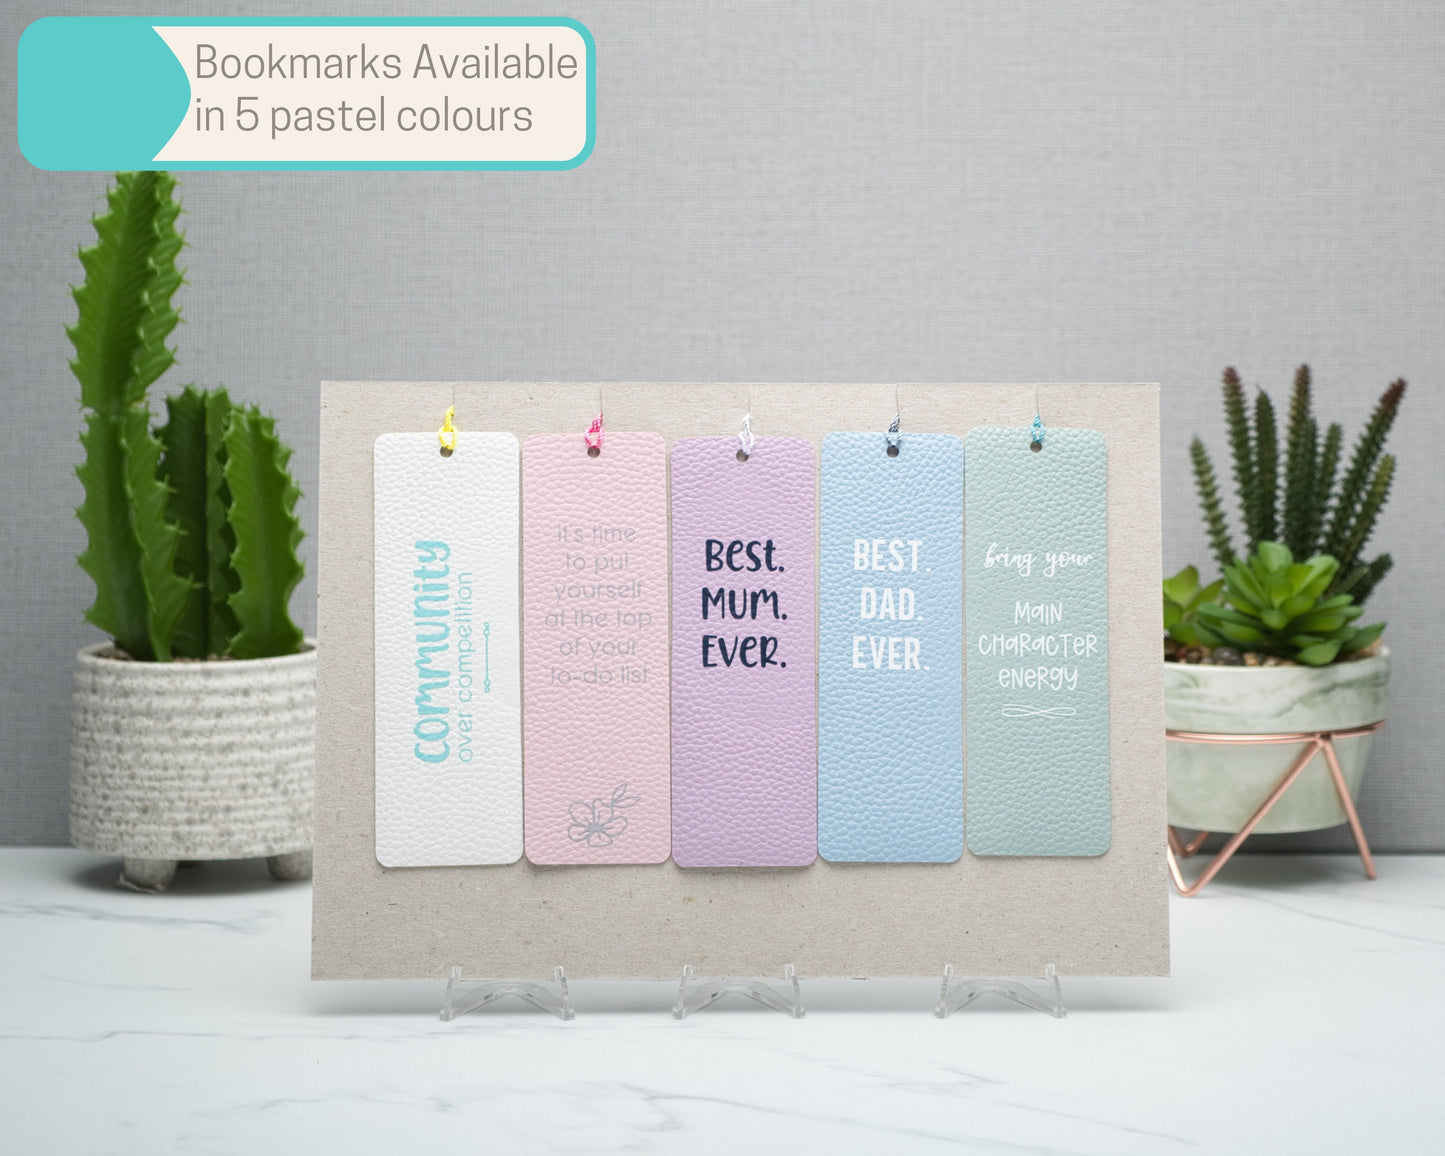 Custom Community over Competition Faux Leather Bookmark, Handmade Pastel Gift for Book Lovers, Self Care Inspirational Quotes